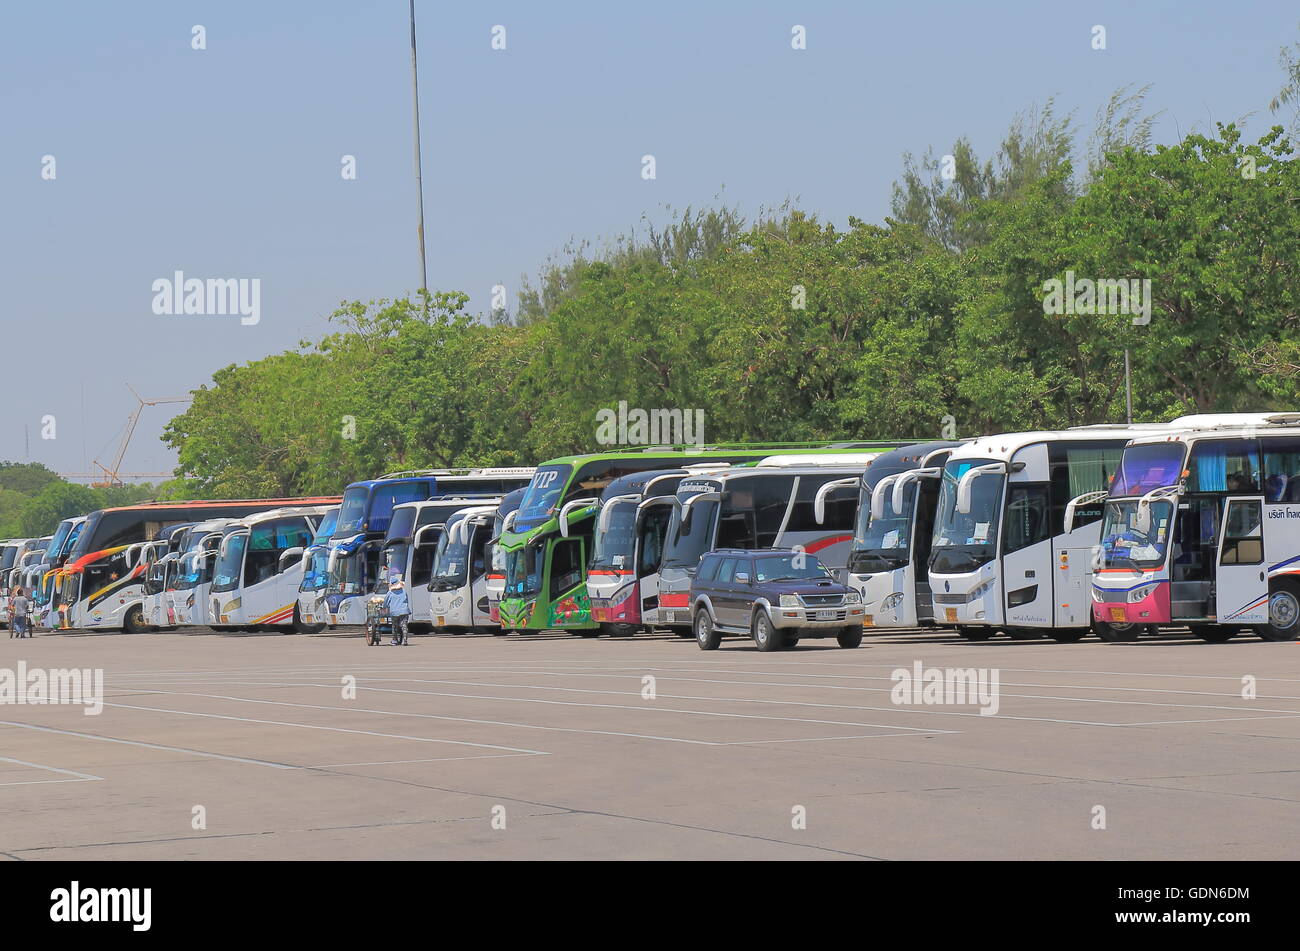 Tourist buses parked at Dusit Palace in Bangkok Thailand. Stock Photo